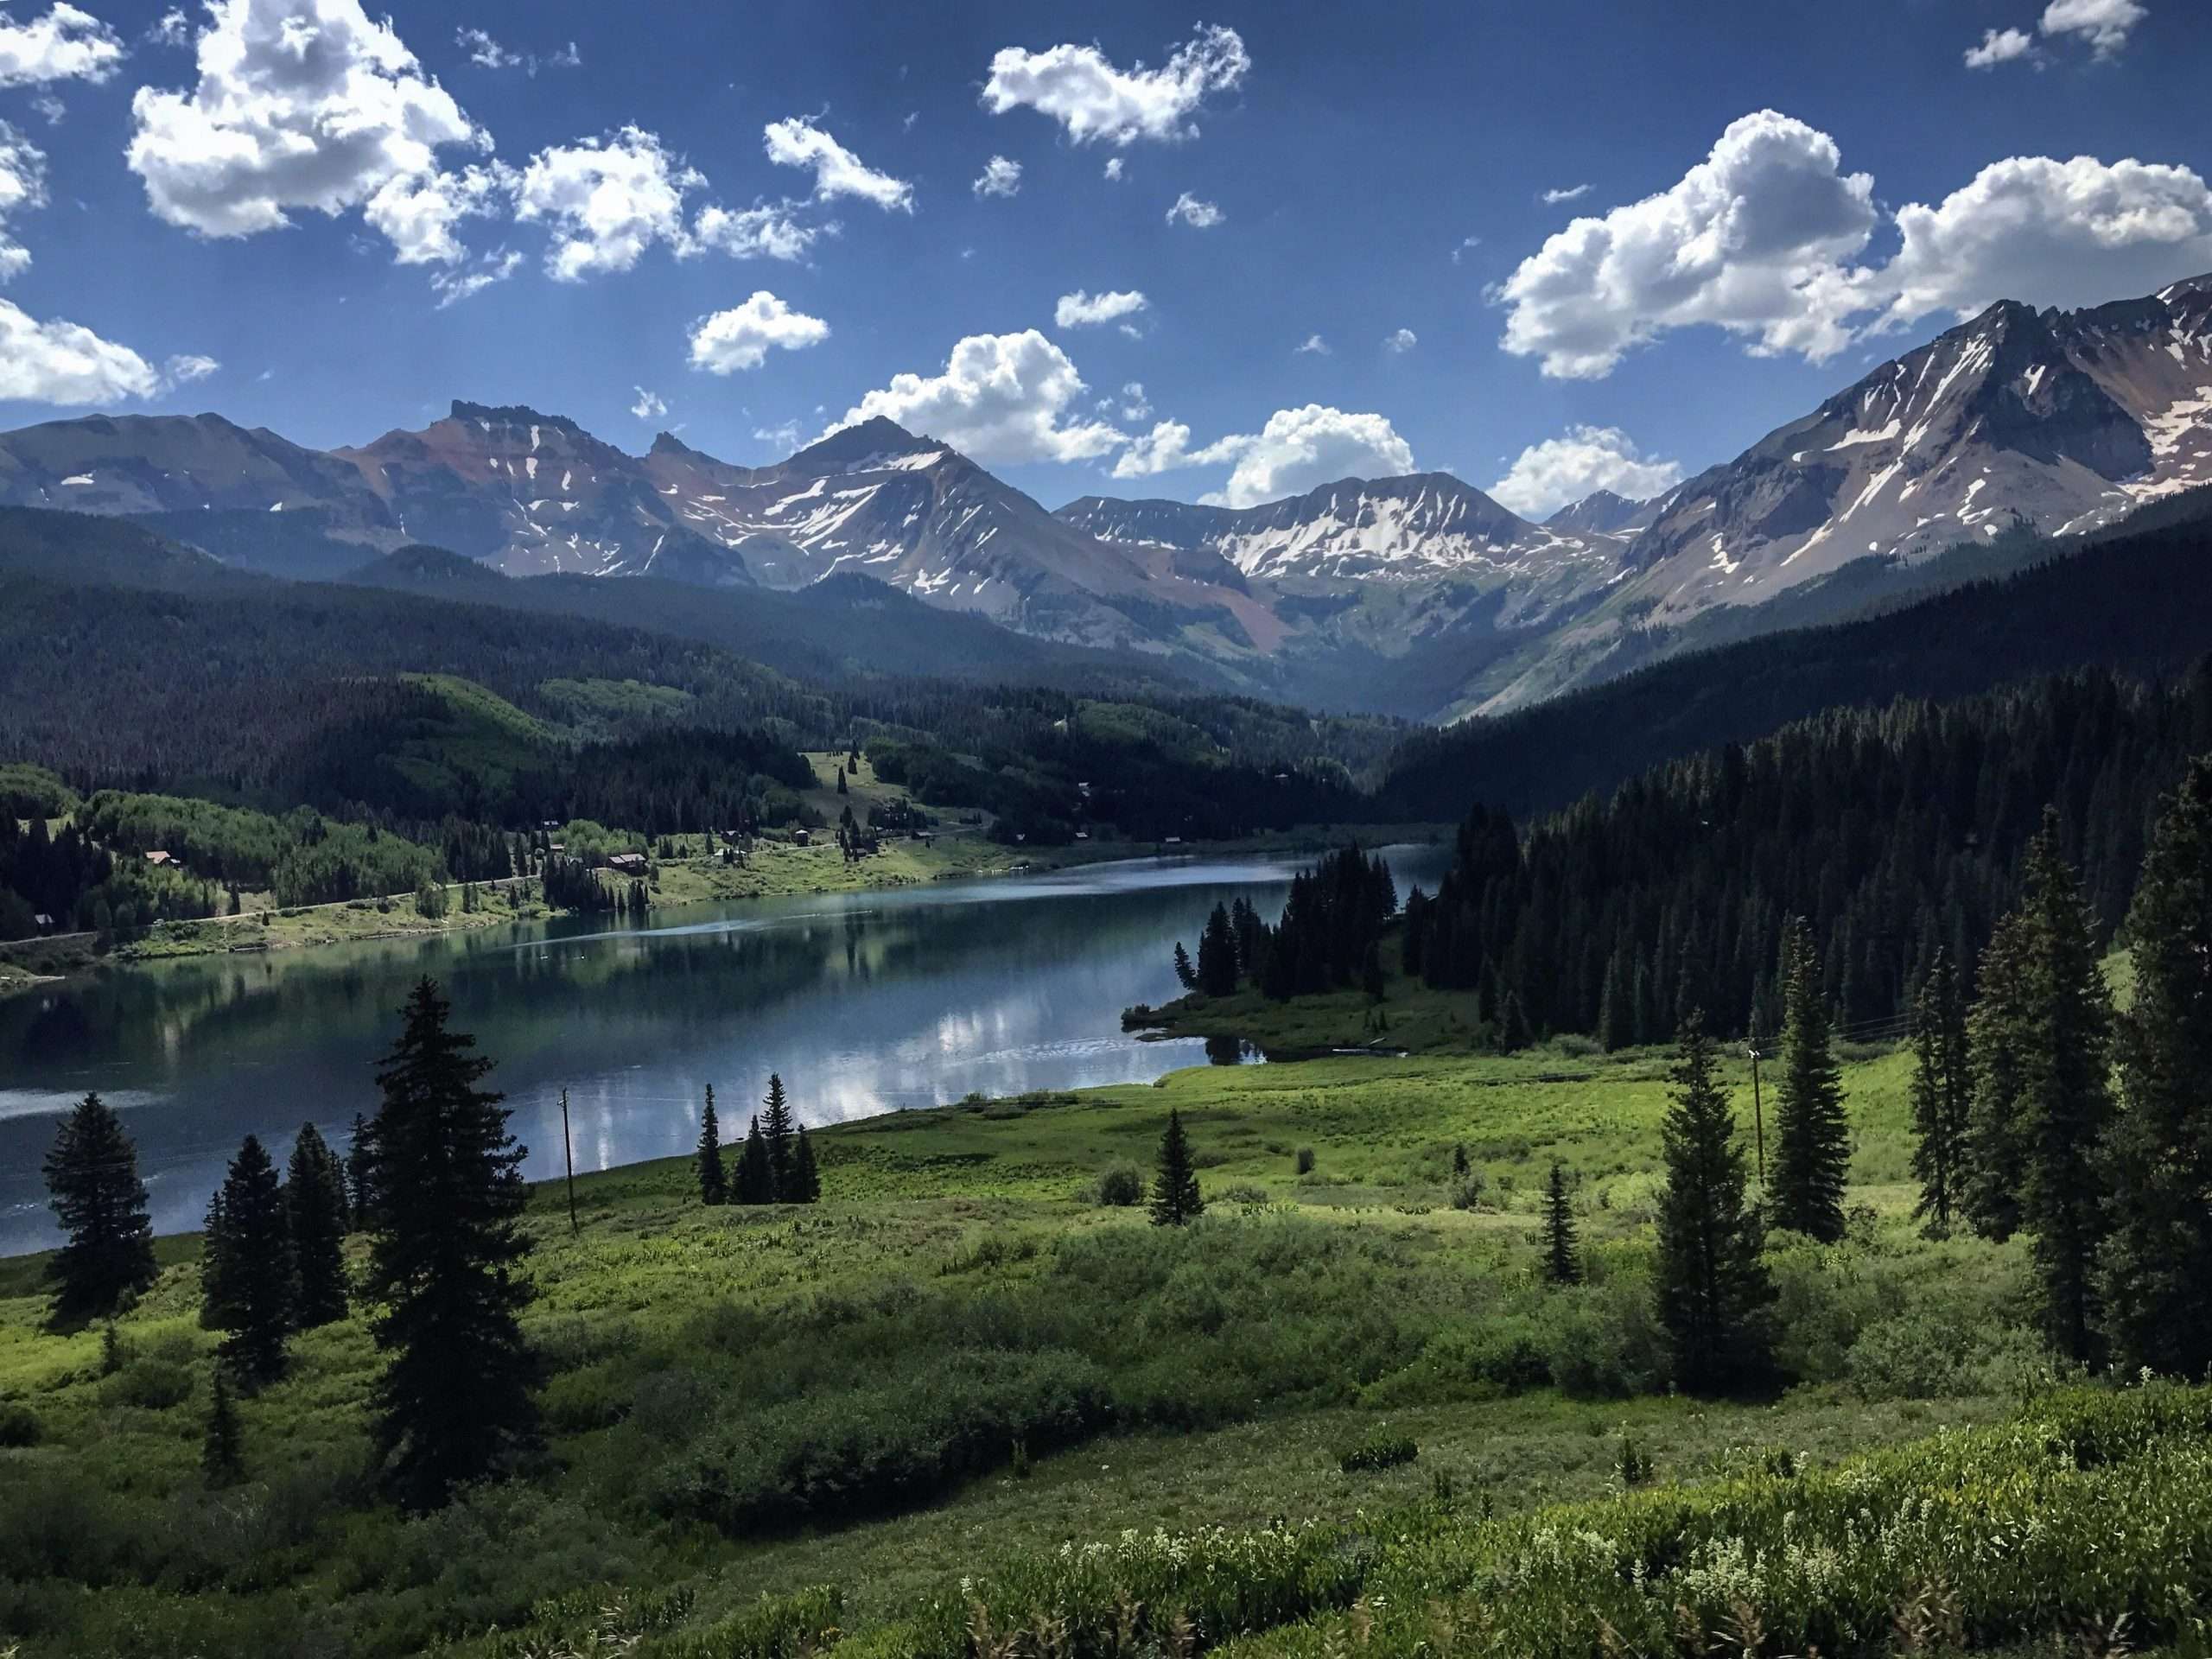 Camping near Crested Butte, Colorado : CampingandHiking